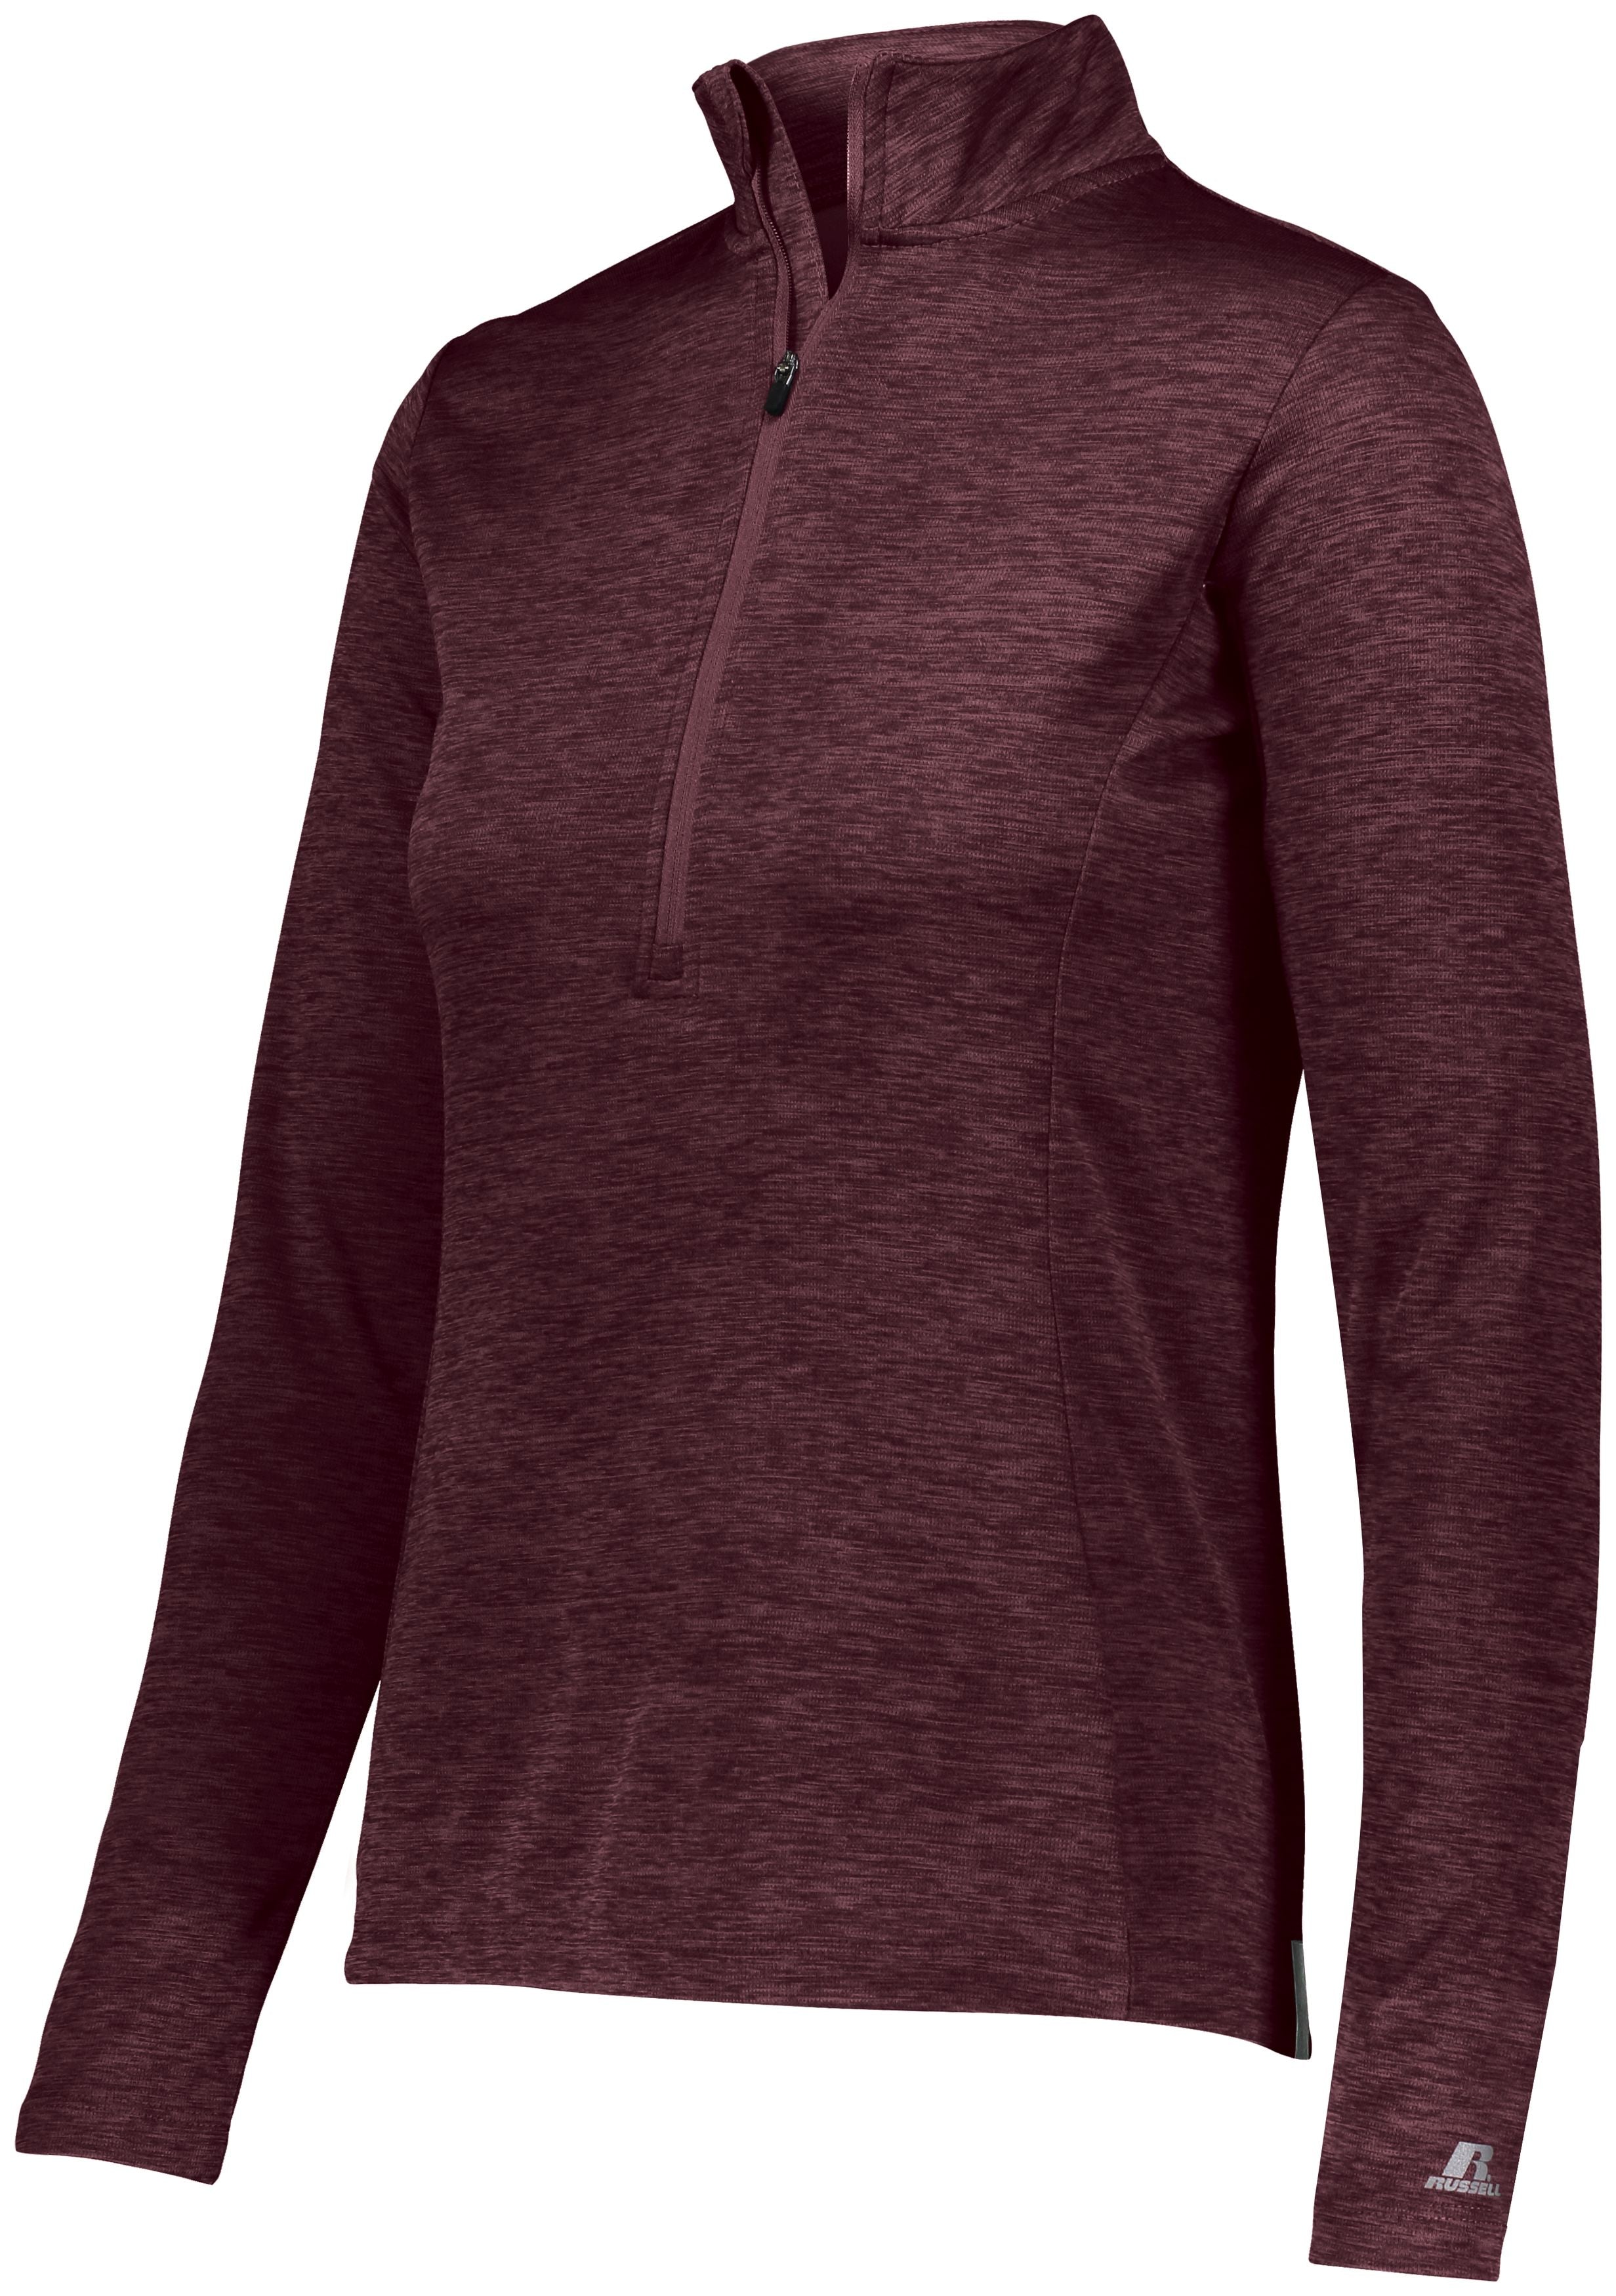 Russell Athletic Ladies Dri-Power Lightweight 1/4 Zip Pullover in Maroon  -Part of the Ladies, Russell-Athletic-Products, Shirts product lines at KanaleyCreations.com